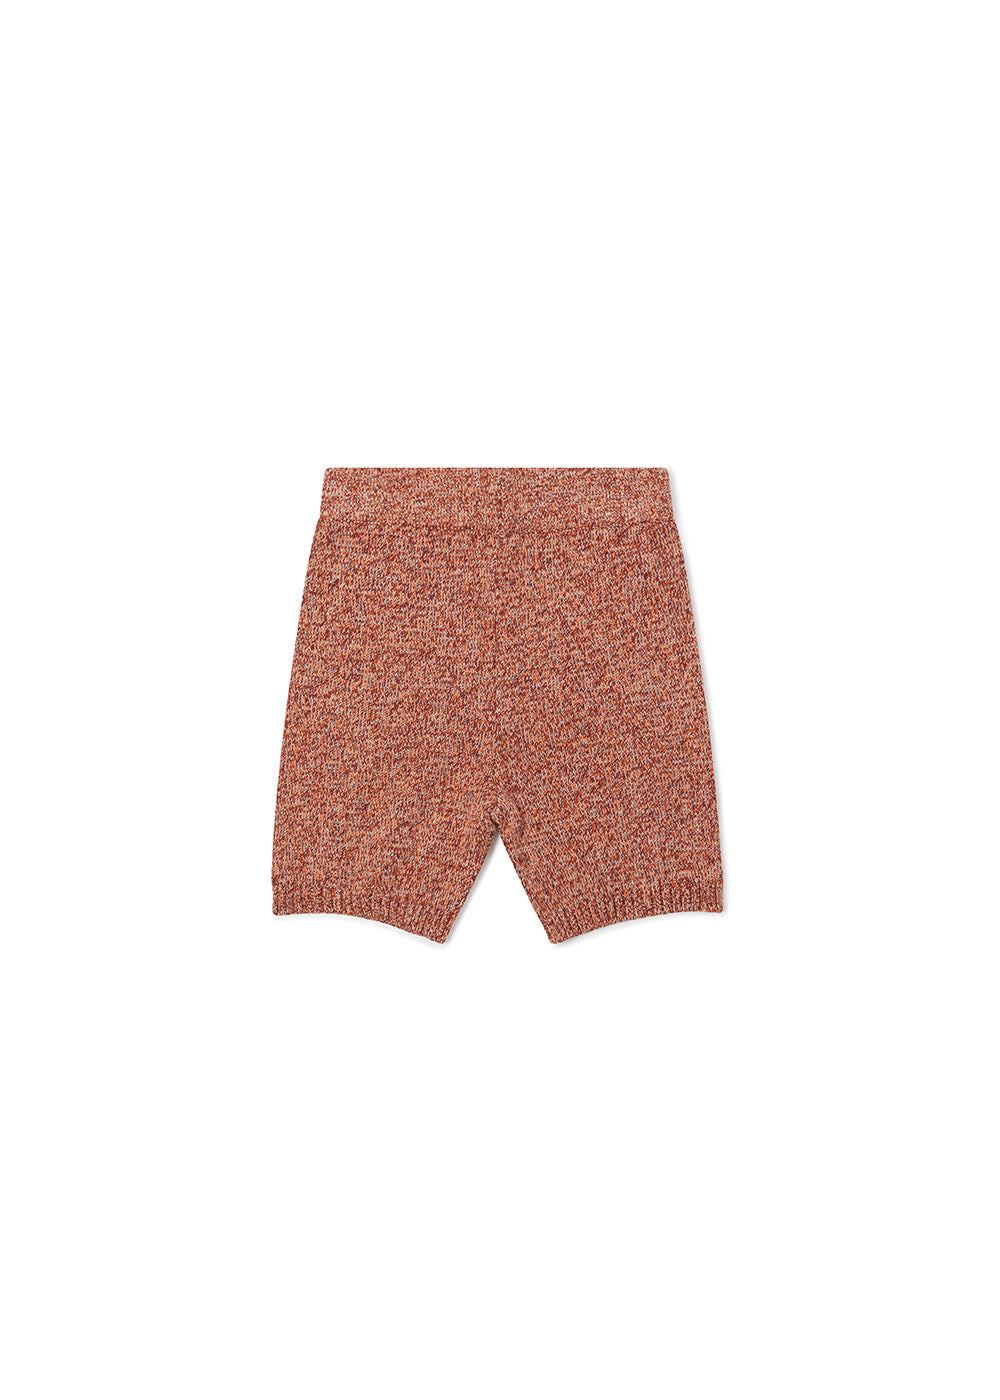 York Knitted Shorts - 2Y-3Y / Mixed Orange Brown